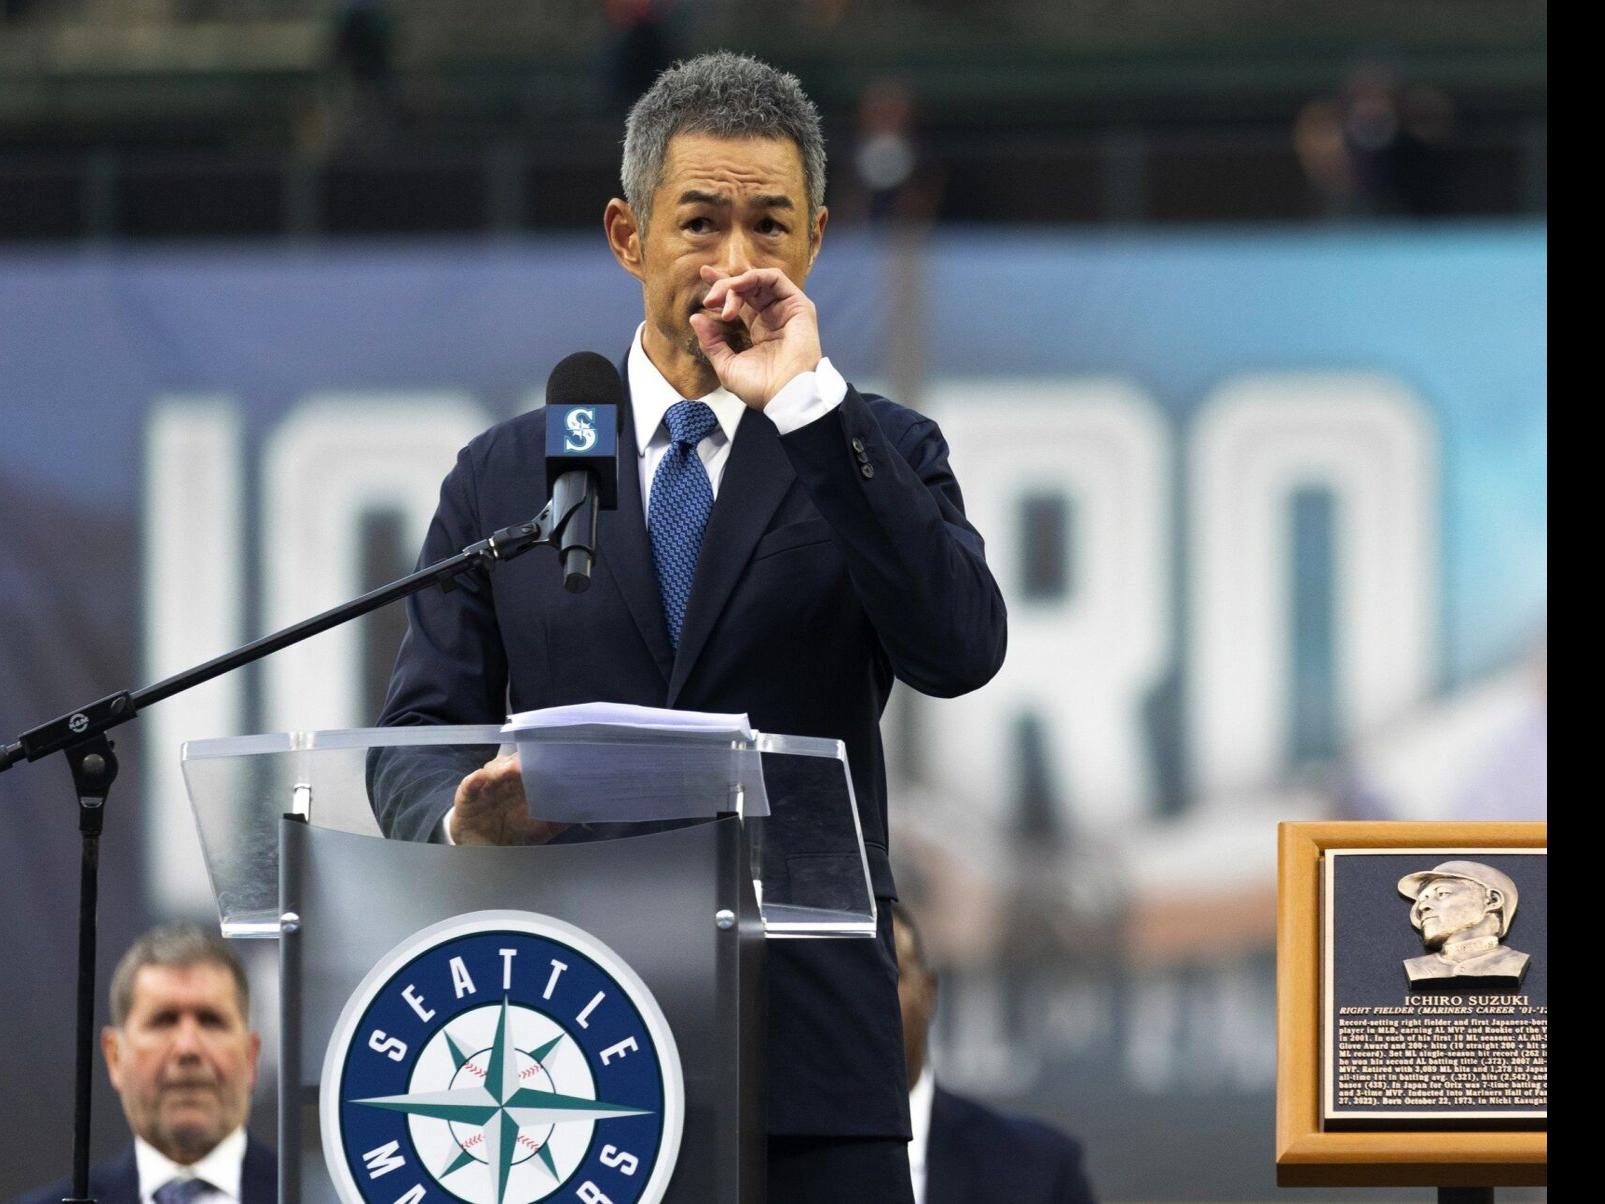 Baseball and Seattle have never left my heart': Ichiro a hit during Mariners'  Hall of Fame induction, Mariners